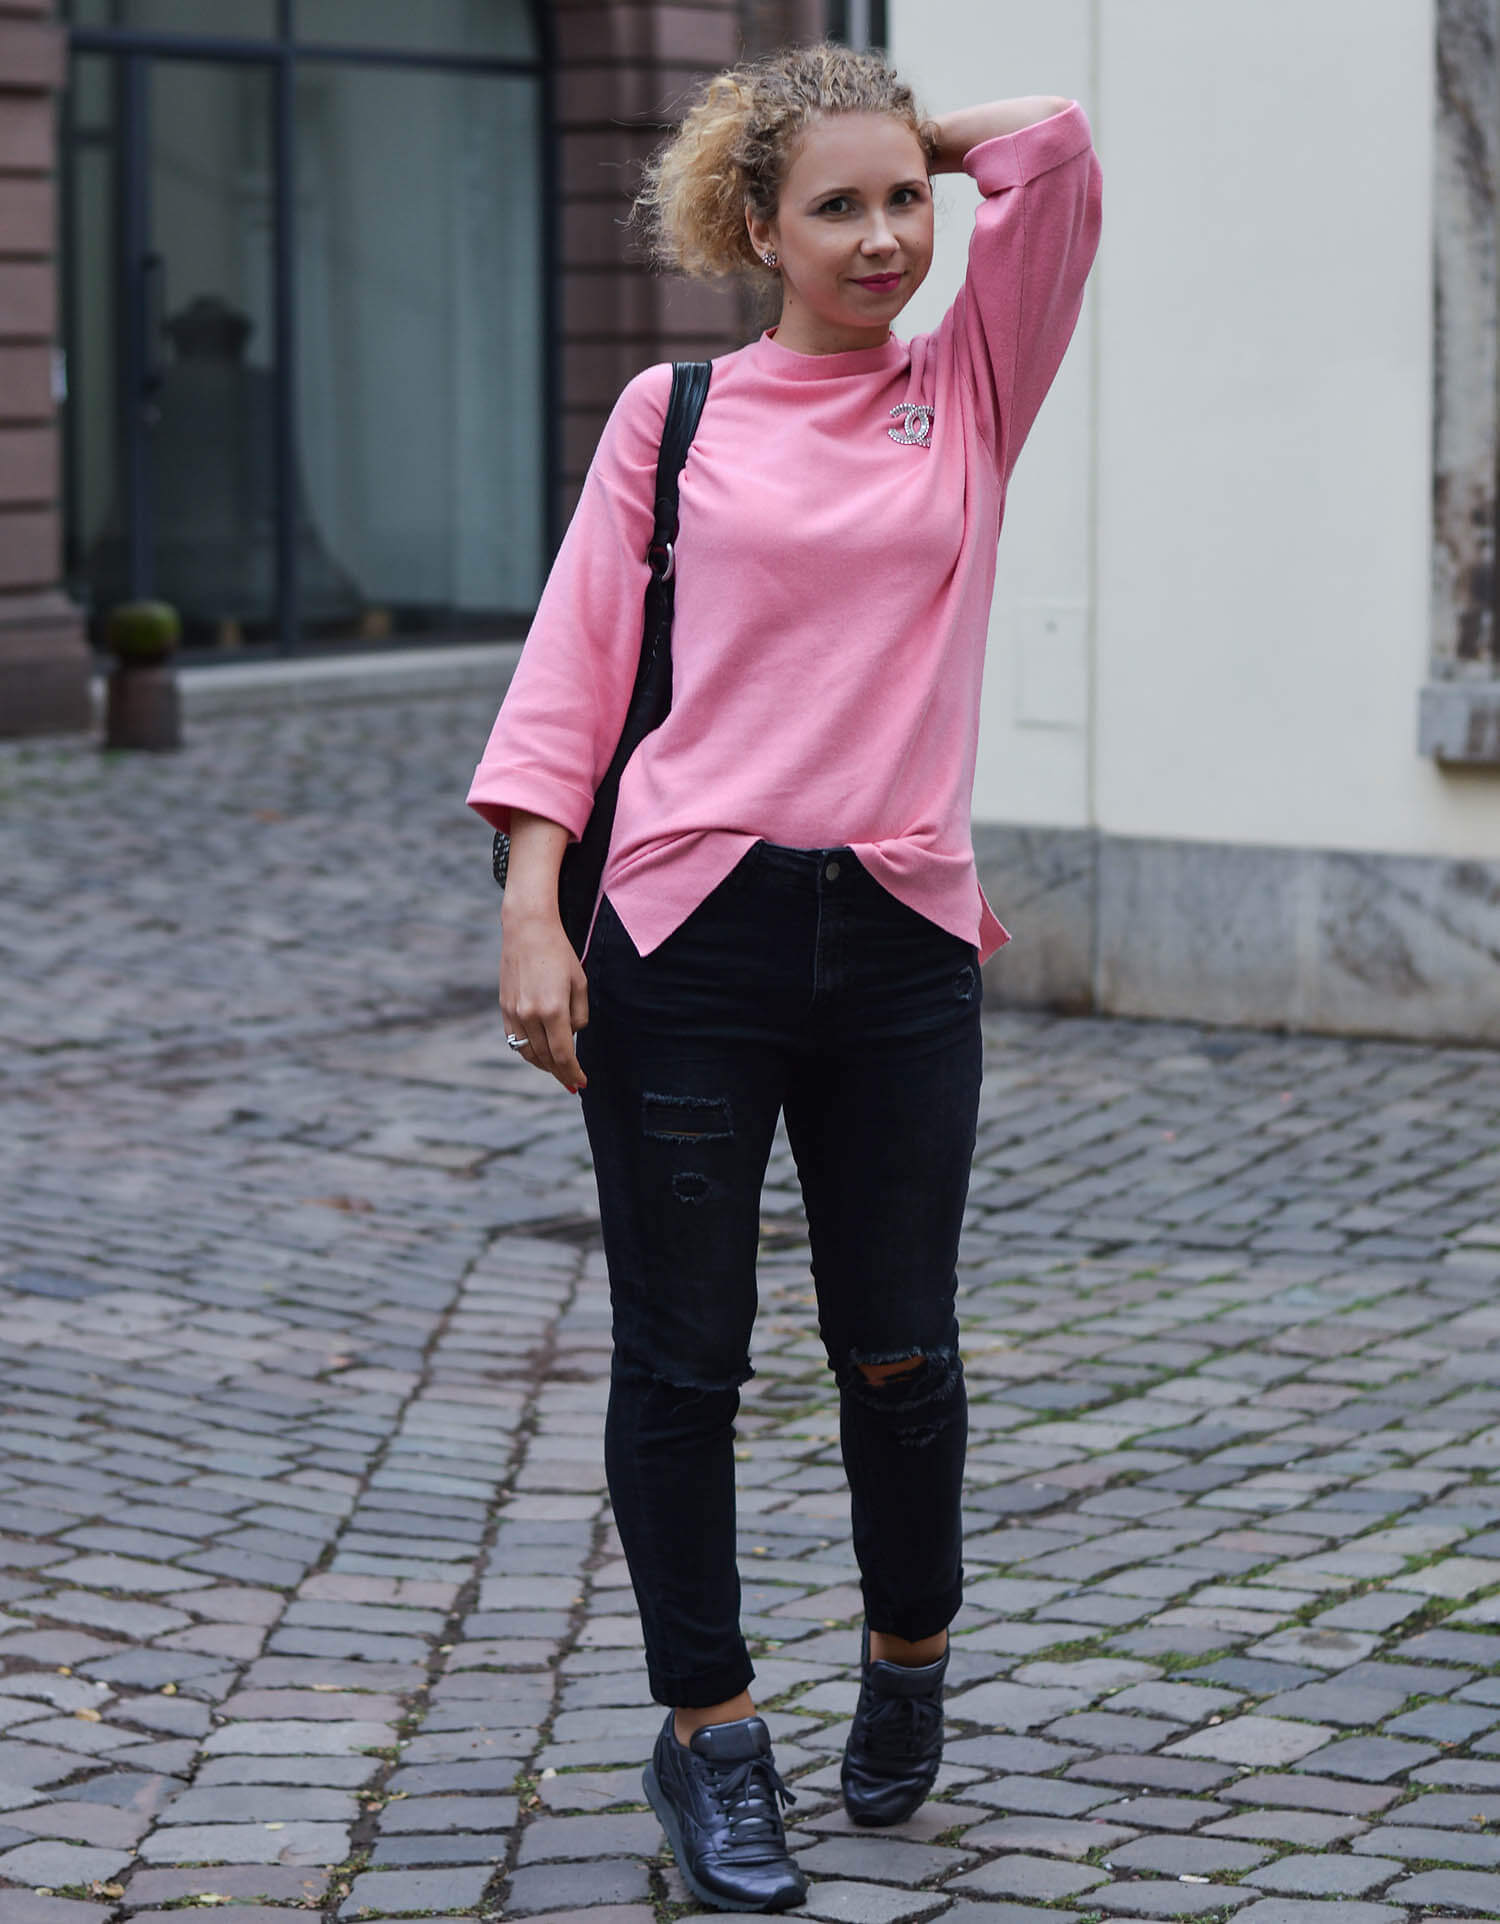 Kationette-fashionblog-nrw-Outfit-Casual-Weekend-Look-with-Pink-Sweater-Ripped-Jeans-Reebok-Sneaker